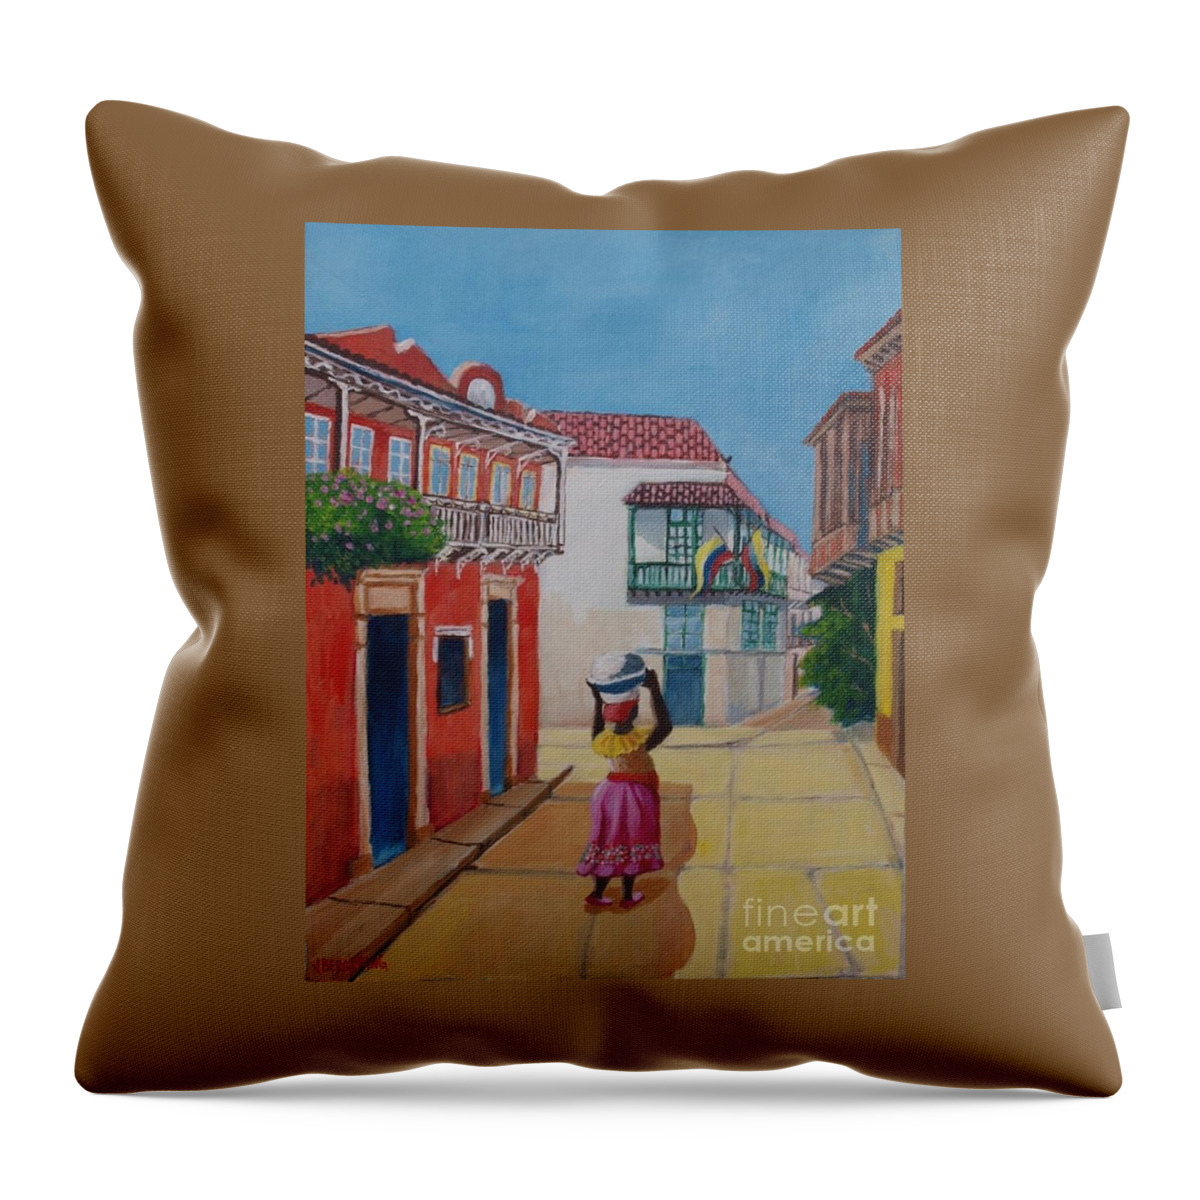 Creole Seller Throw Pillow featuring the painting Cartagena seller by Jean Pierre Bergoeing